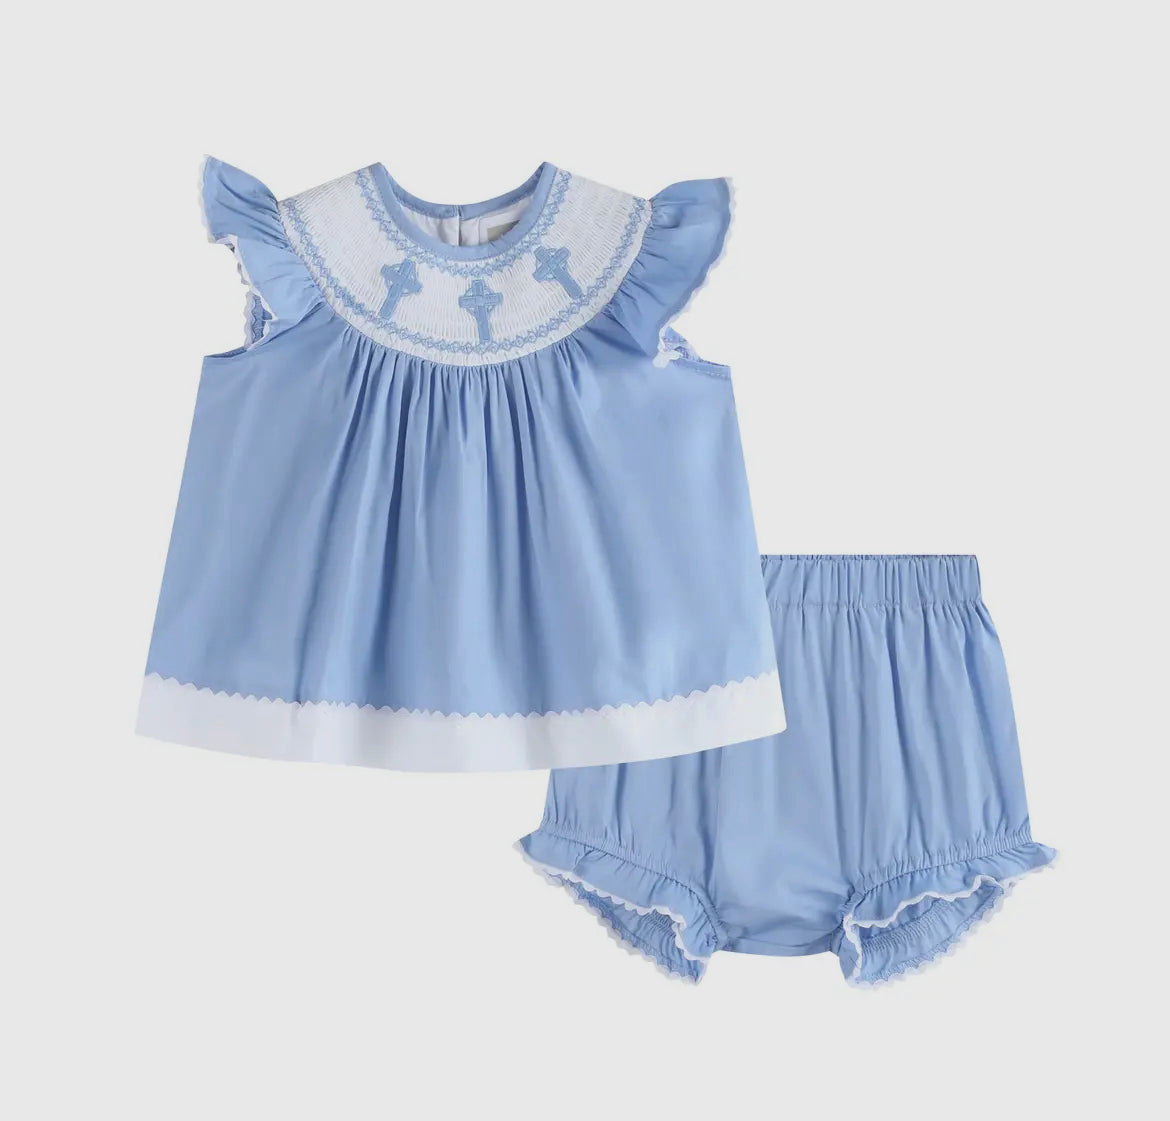 Periwinkle Crosses Smocked dress and bloomers set